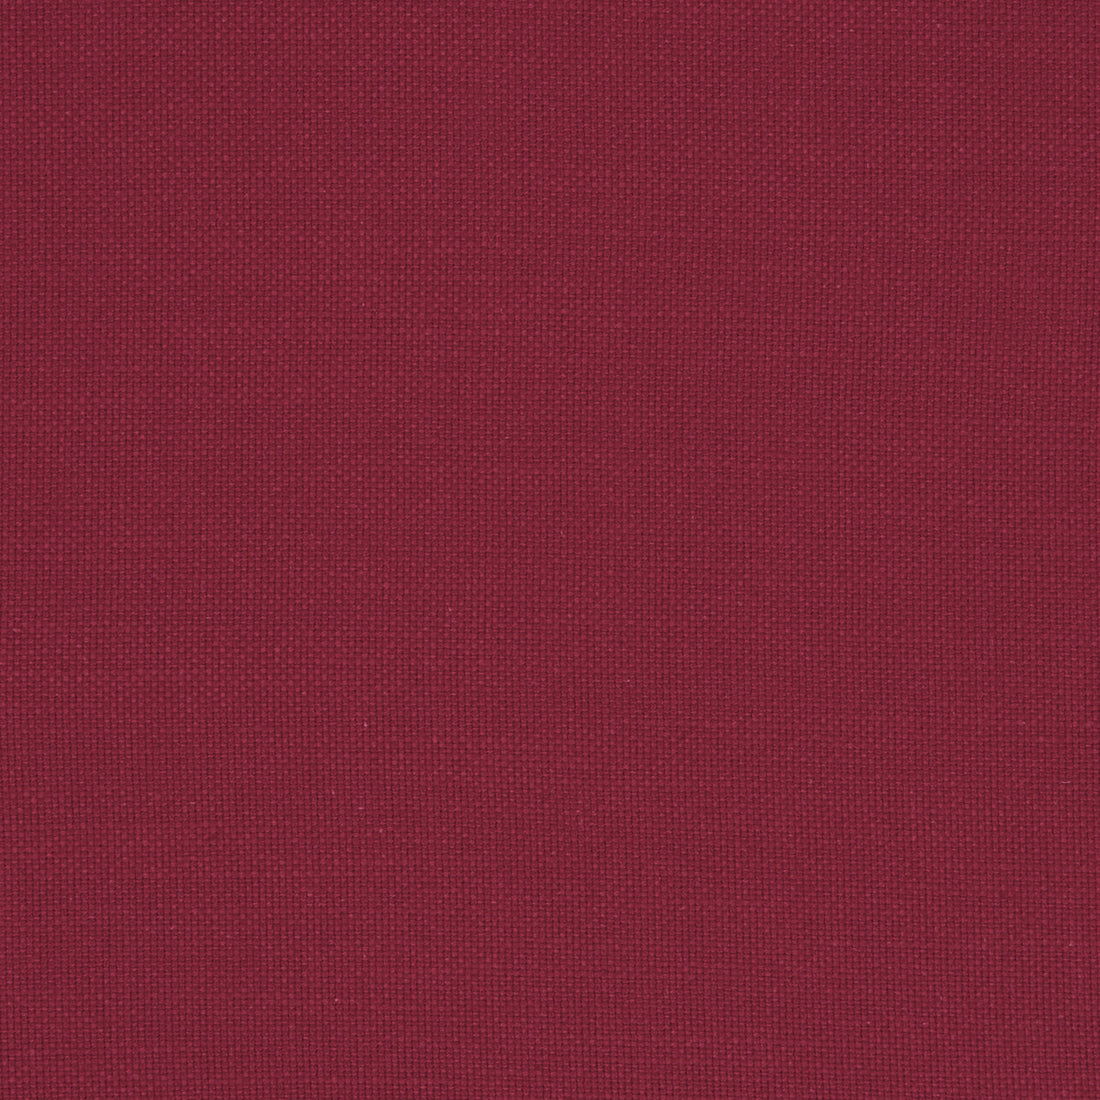 Nantucket fabric in crimson color - pattern F0594/14.CAC.0 - by Clarke And Clarke in the Clarke &amp; Clarke Nantucket collection